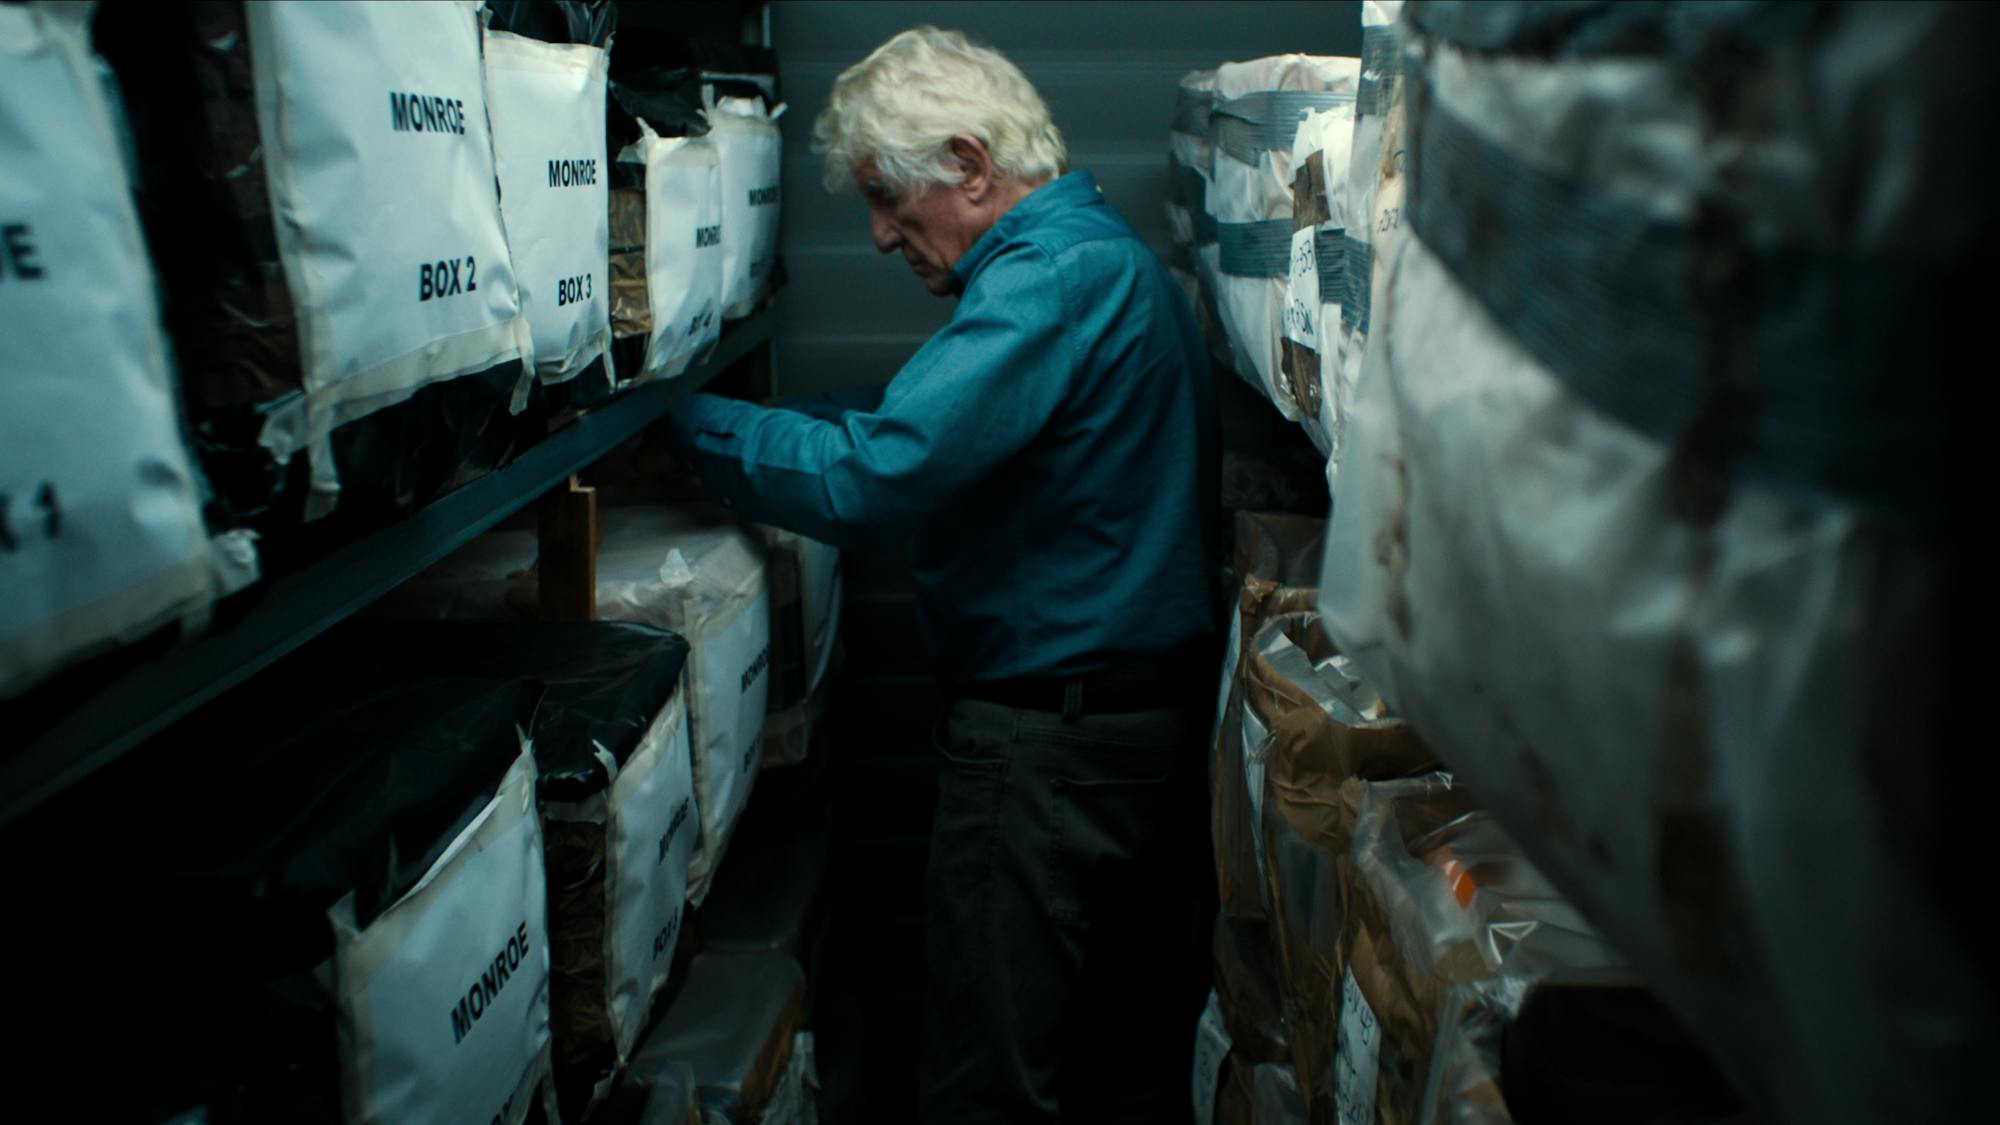 Anthony Summers wears a jean top and looks through boxes labeled 'Monroe Boxs' in what seems like a storage unit.